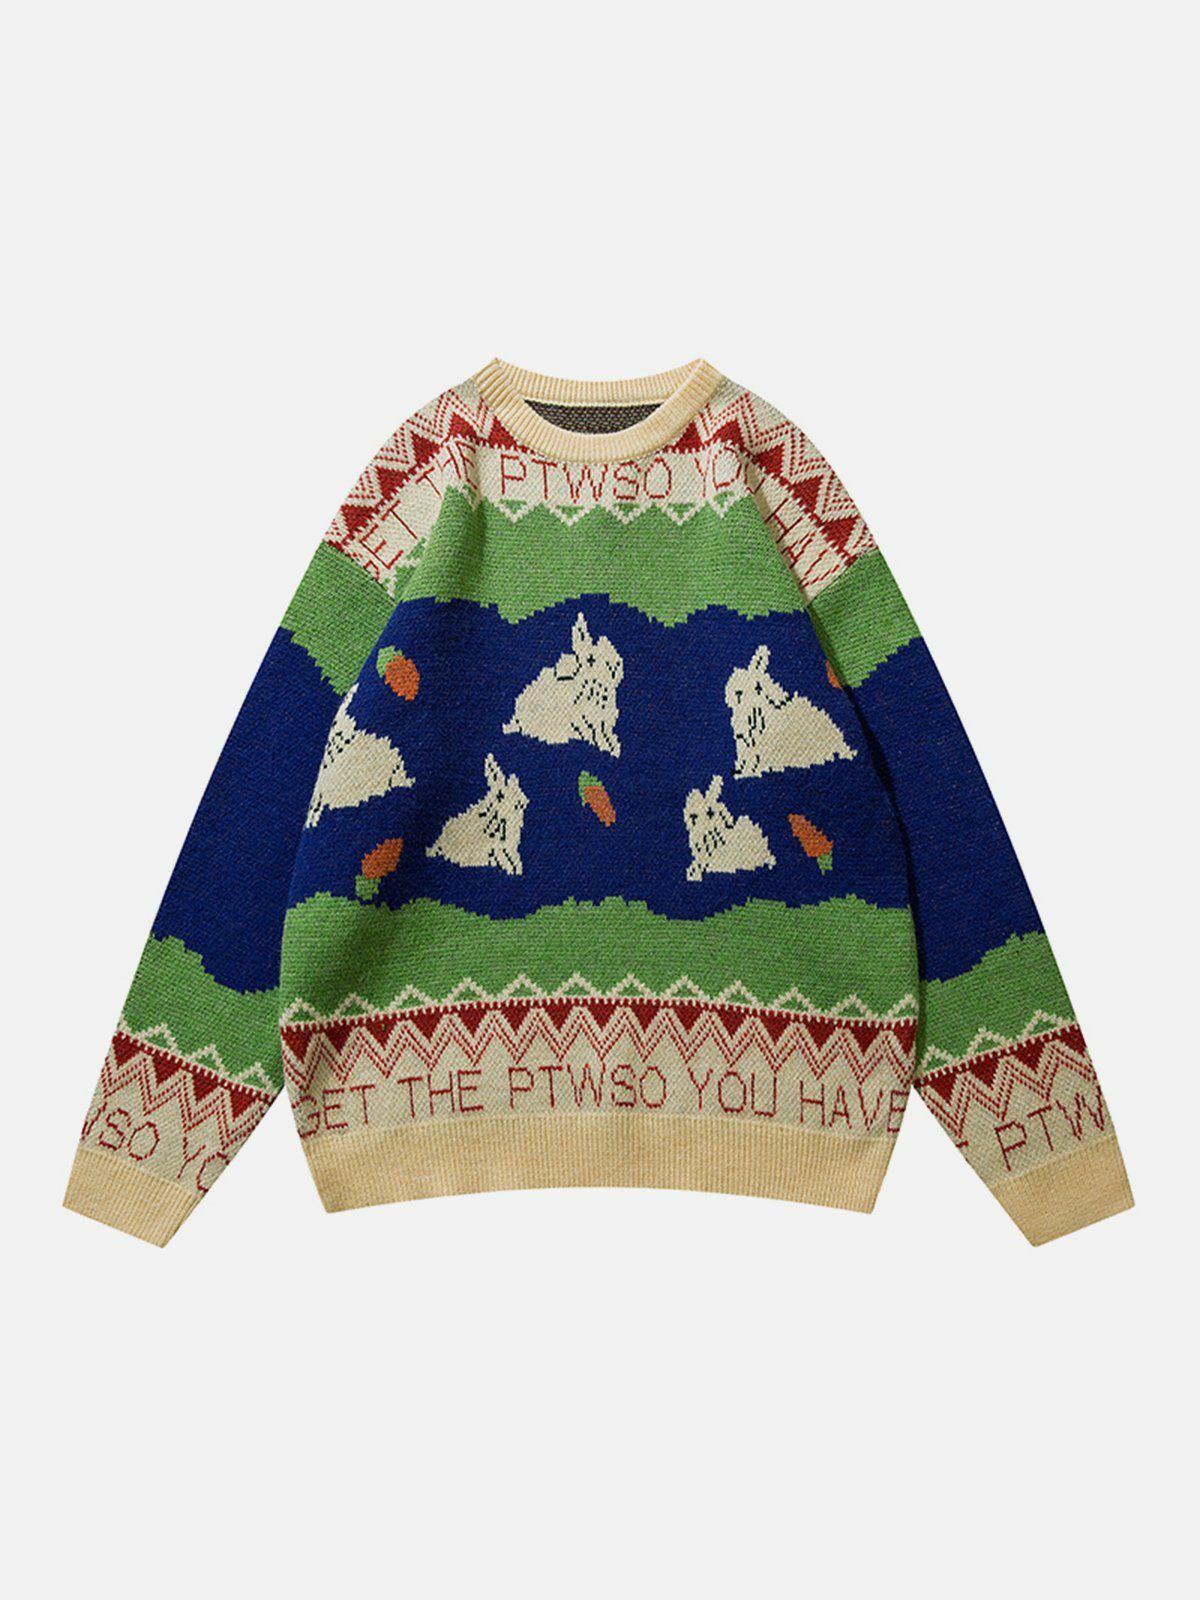 quirky rabbit graphic sweater cozy & playful y2k fashion 4368